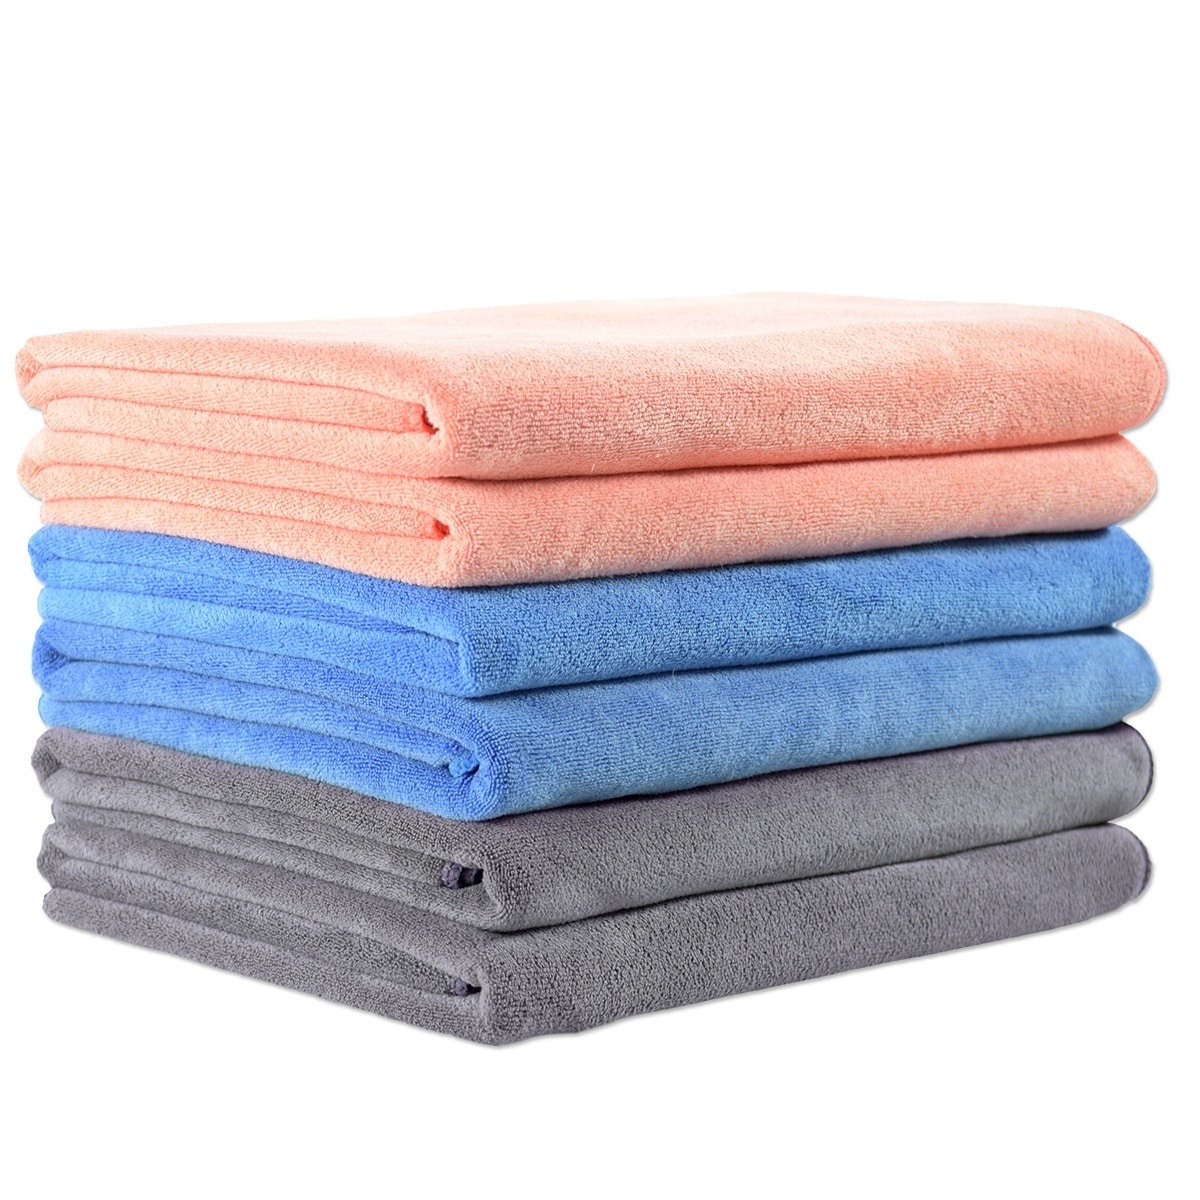 White Pack of 6 Large Bath Towels 100% Cotton 27x55 Highly